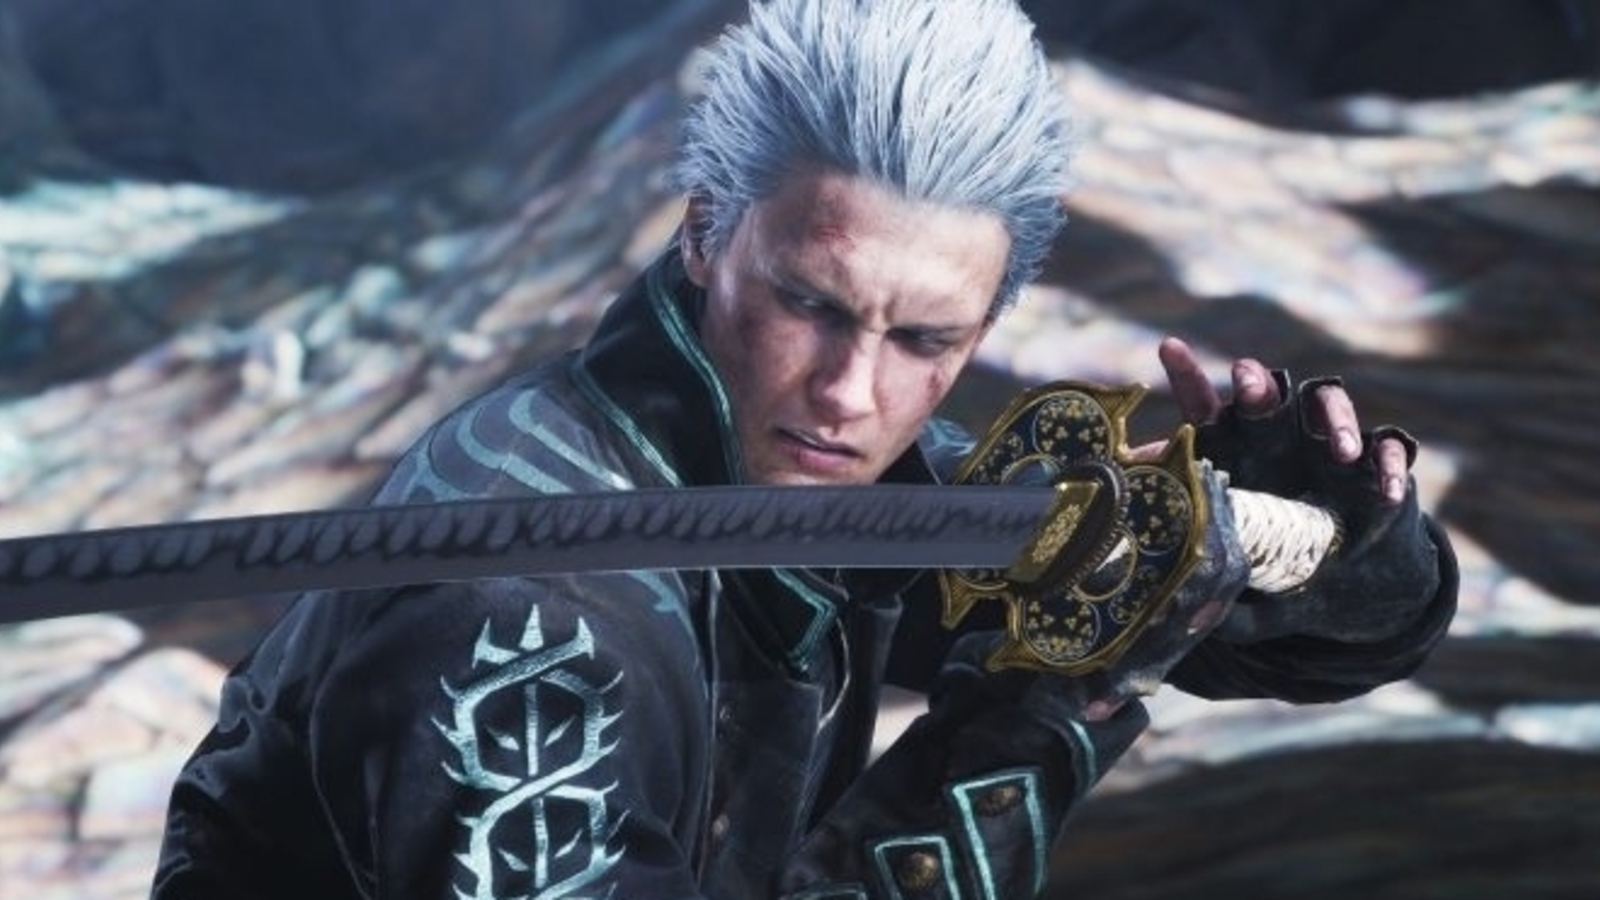 Maku on X: Vergil is so fucking sick 🔥 🎵 I AM THE STORM THAT IS